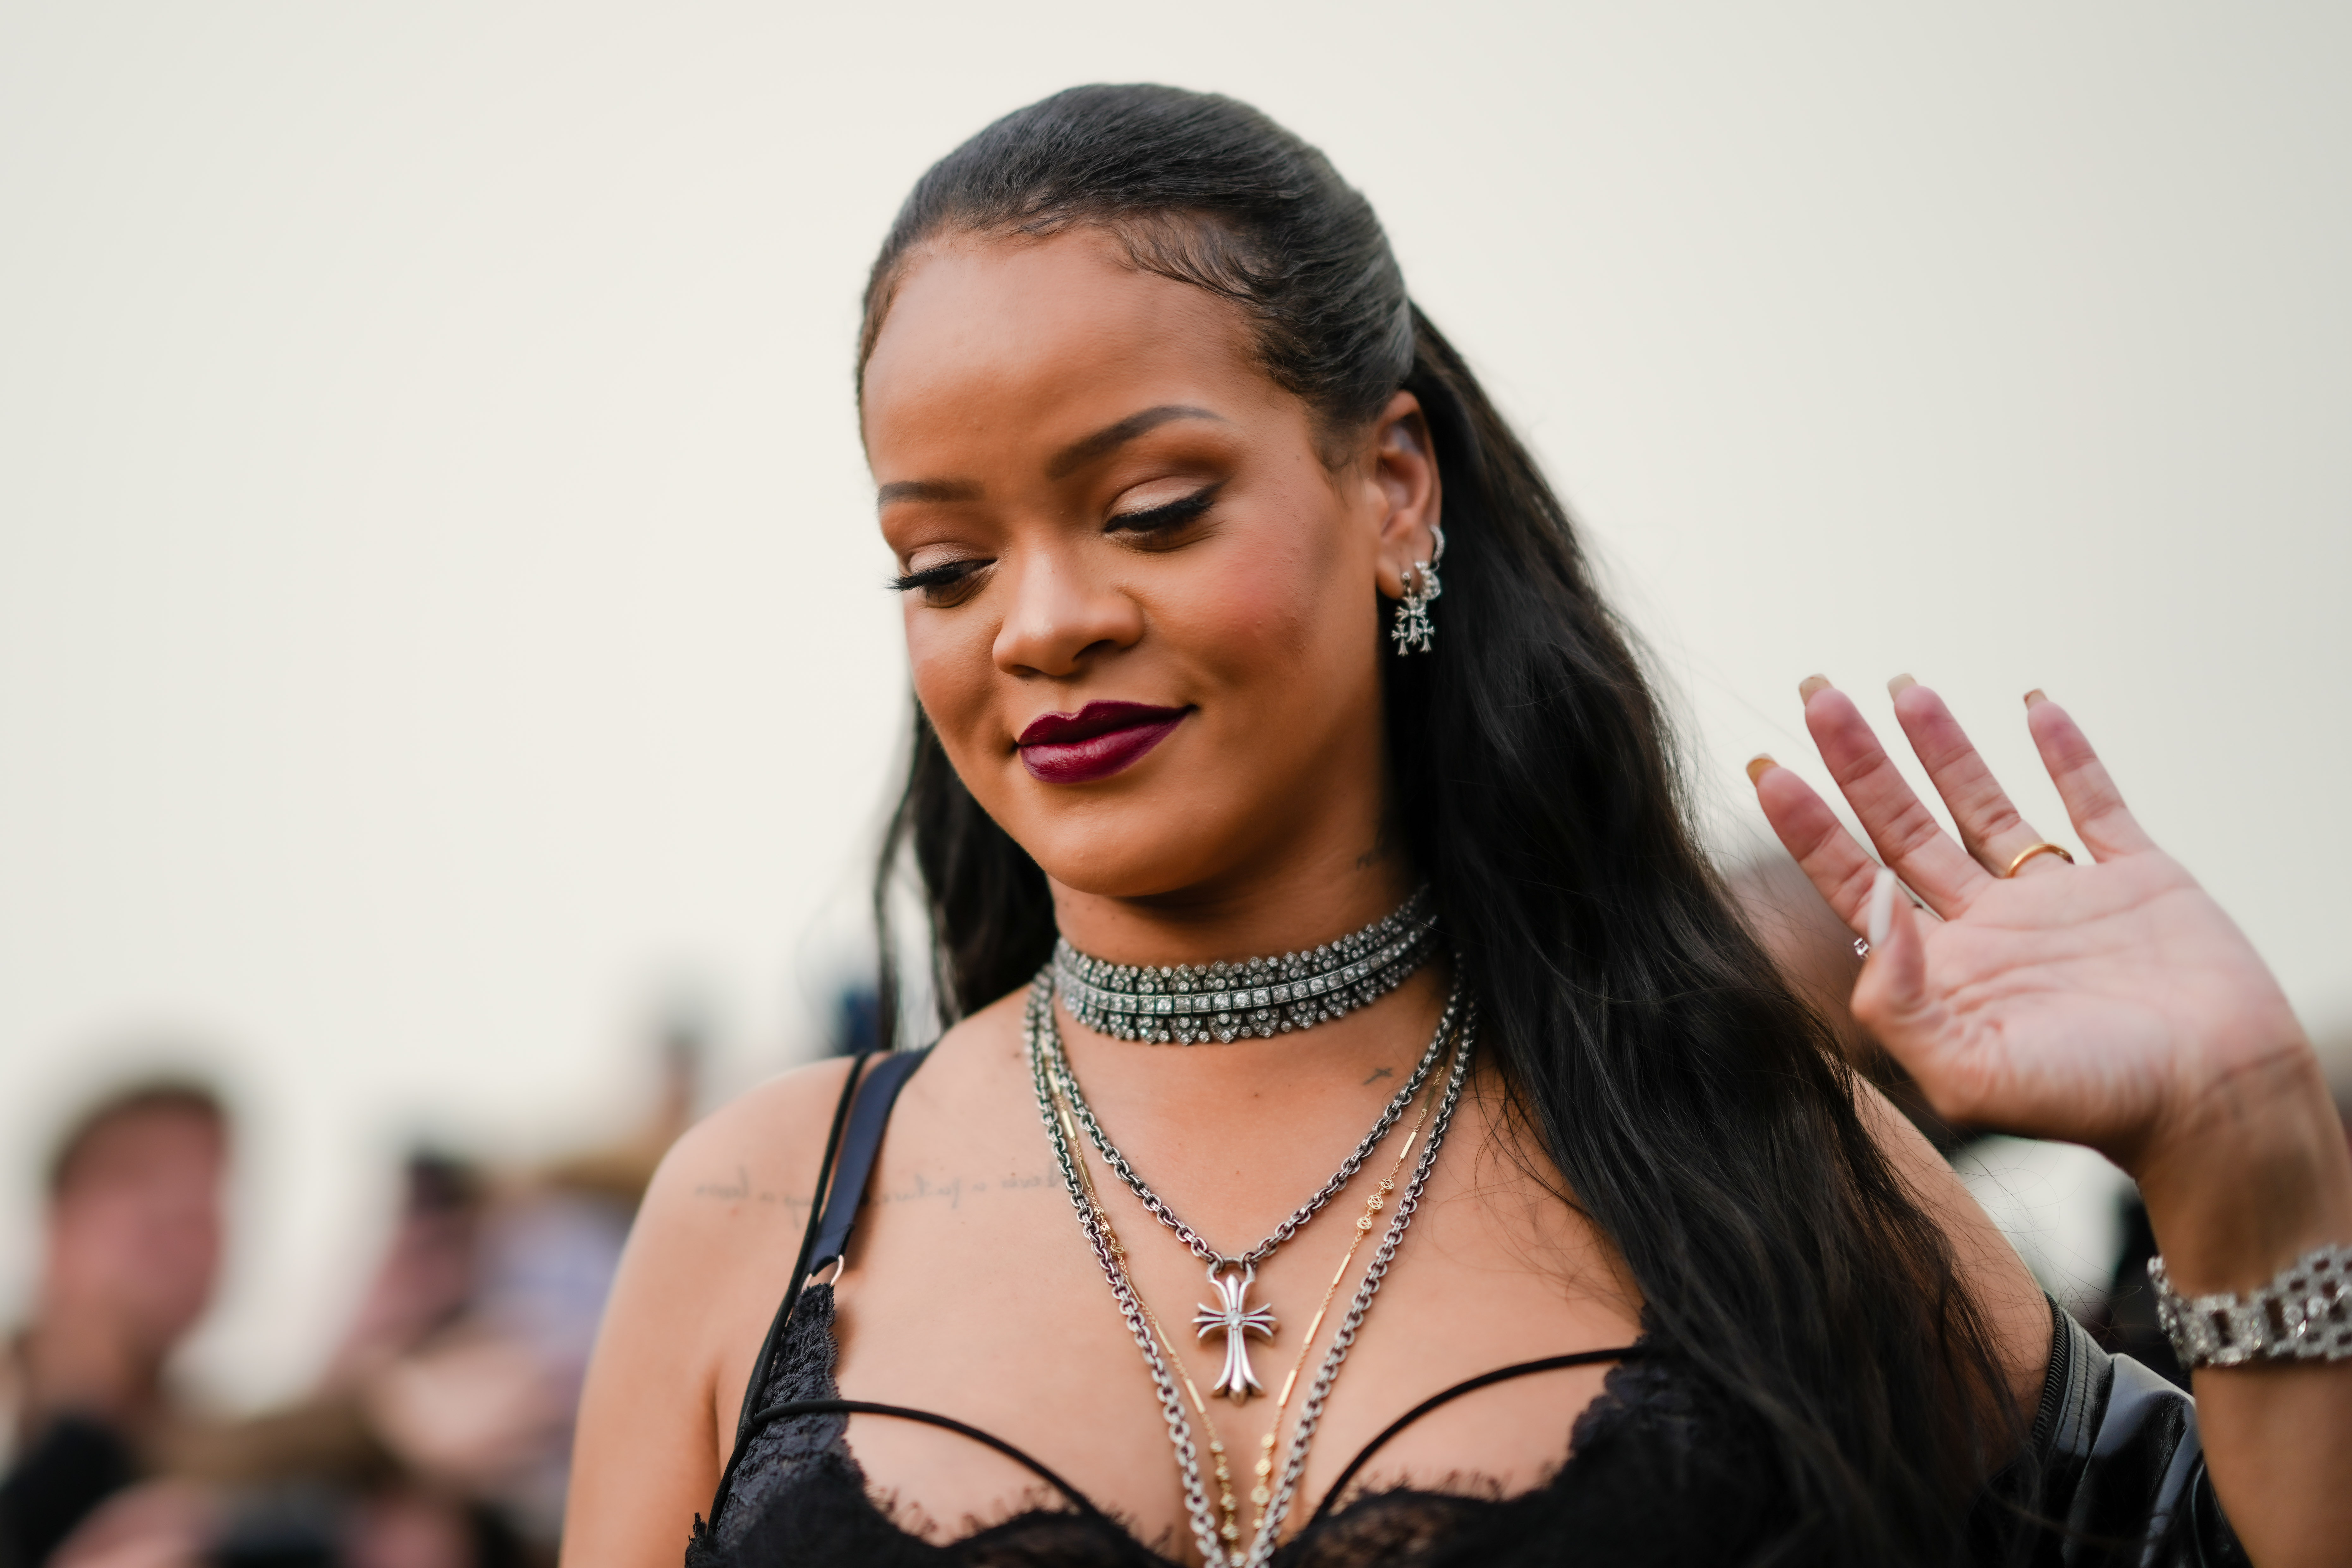 Rihanna is youngest self-made female billionaire